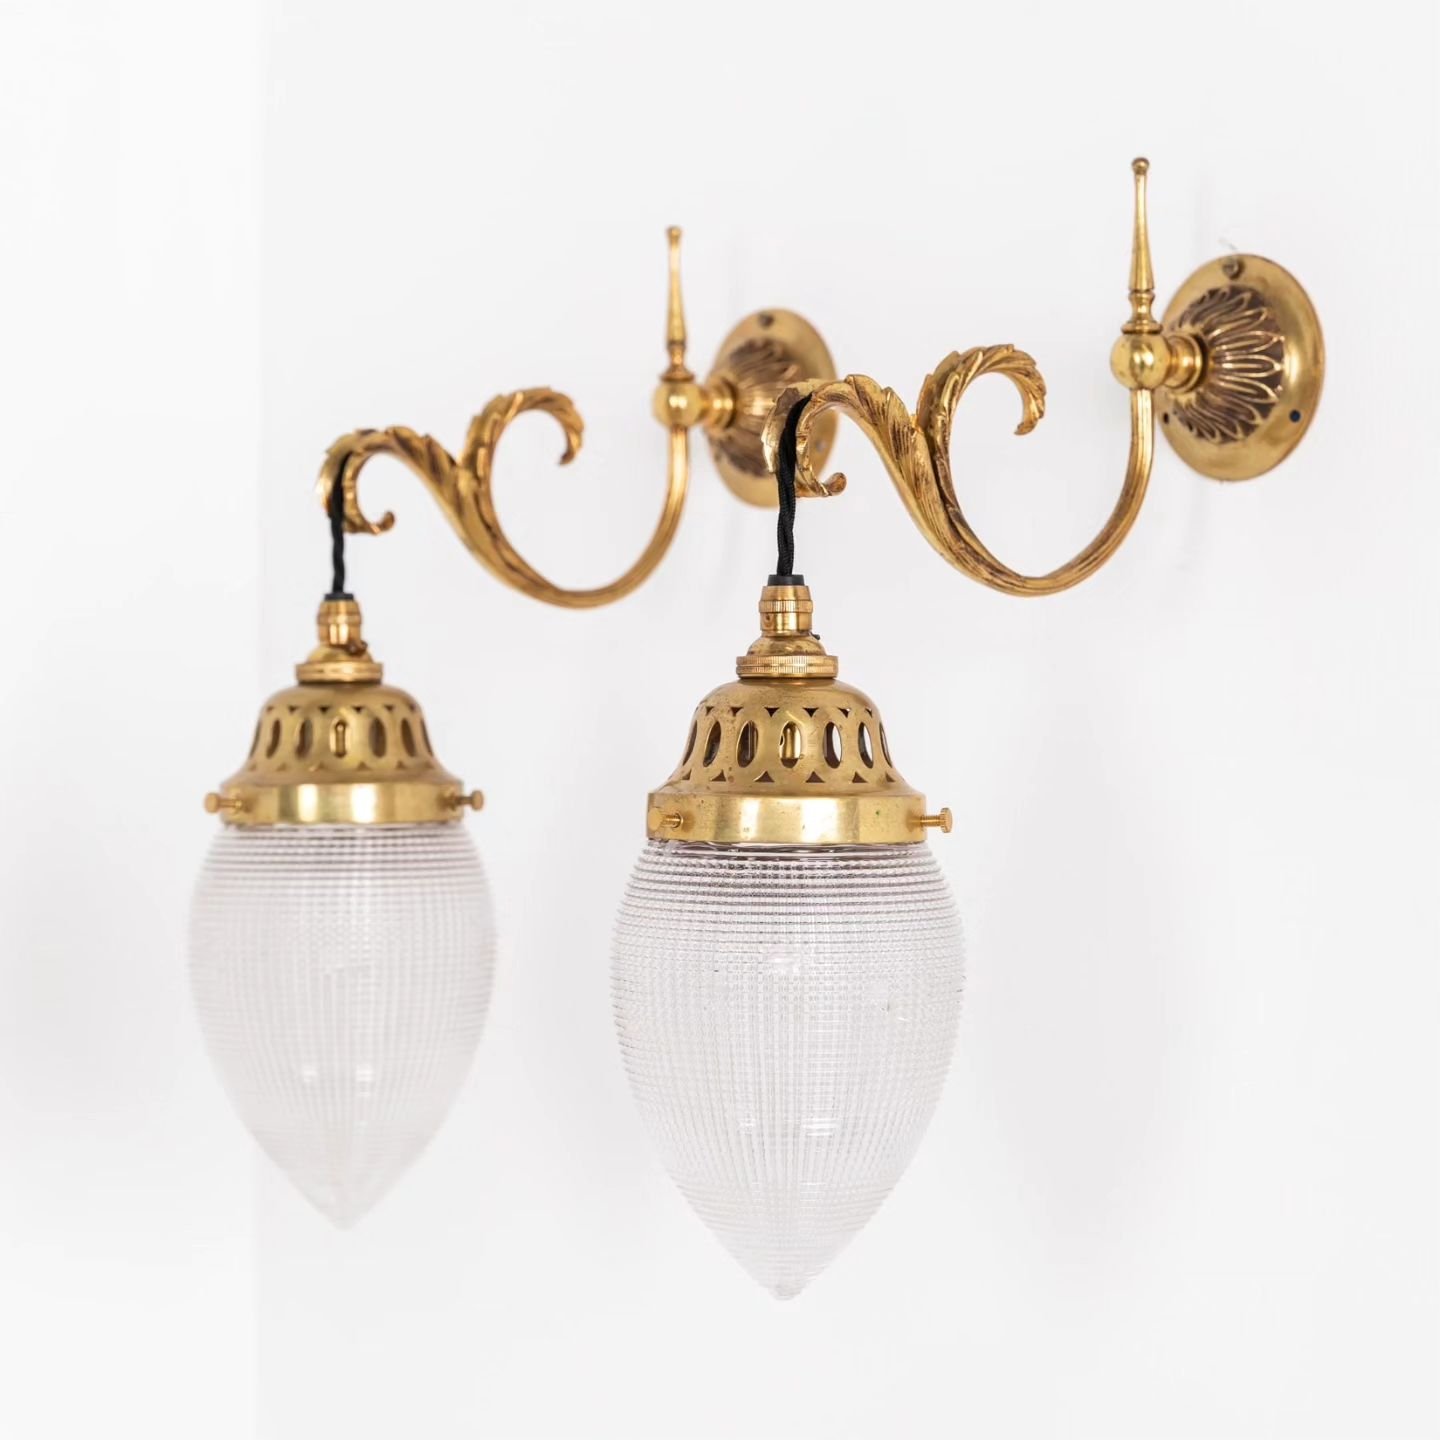 A pretty special pair of wall sconces - very likely made by Osler, complete with matched Holophane pinecones. Incredibly detailed cast brass with the original gilt finish. A very attractive pair and of the highest quality too 👌

#antiquesworkshop #v